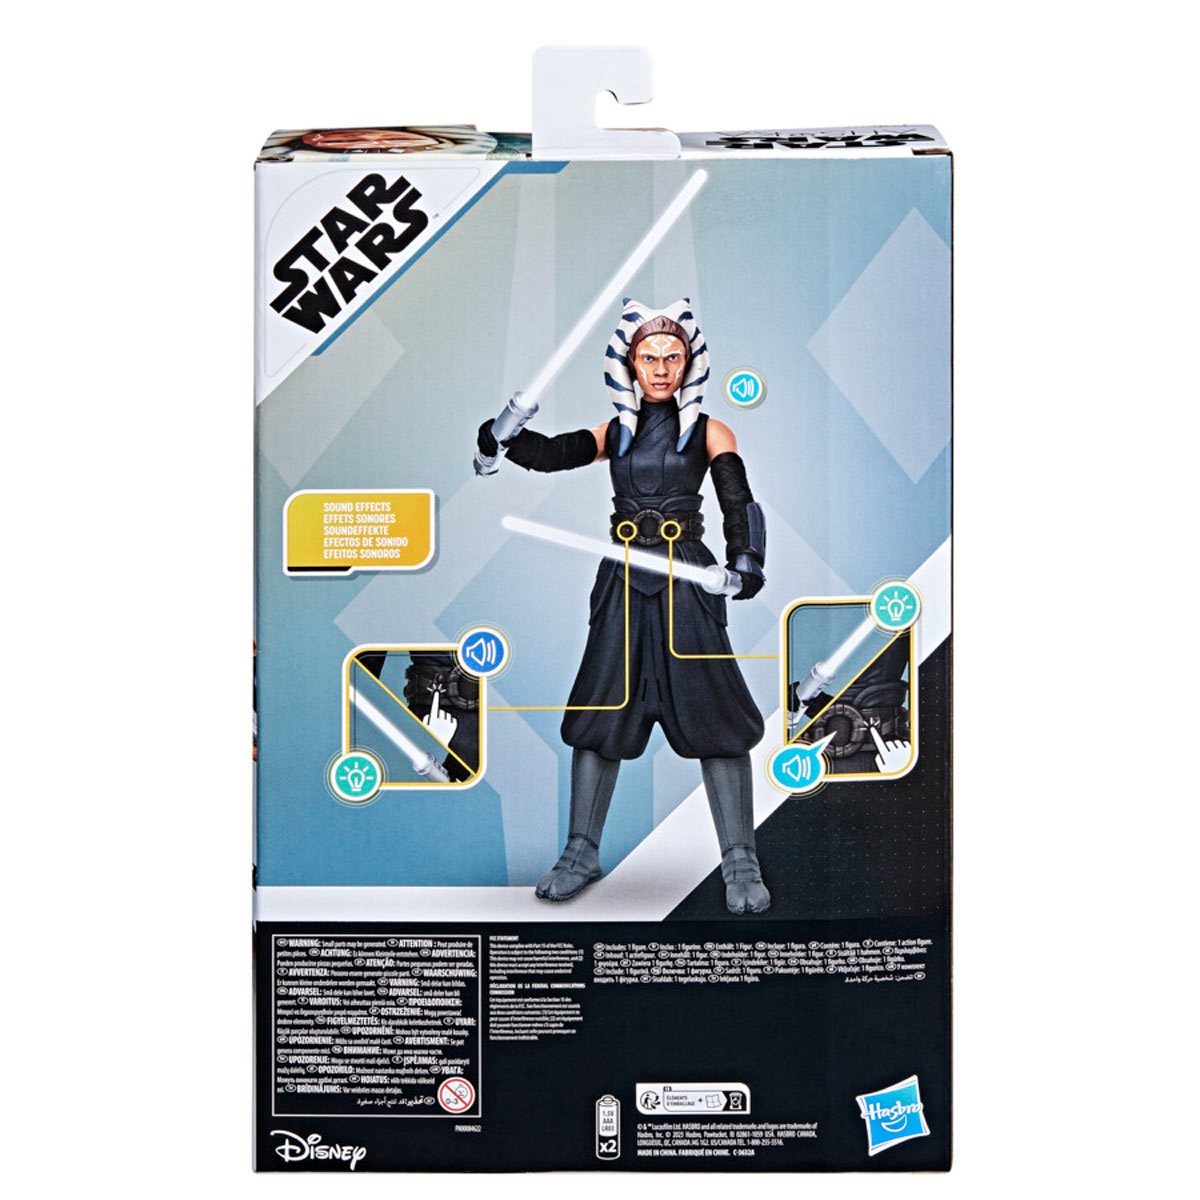 Star Wars Galactic Action The Mandalorian & Grogu Interactive Electronic  12-Inch-Scale Figures, Toys Kids Ages 4 and Up - Star Wars